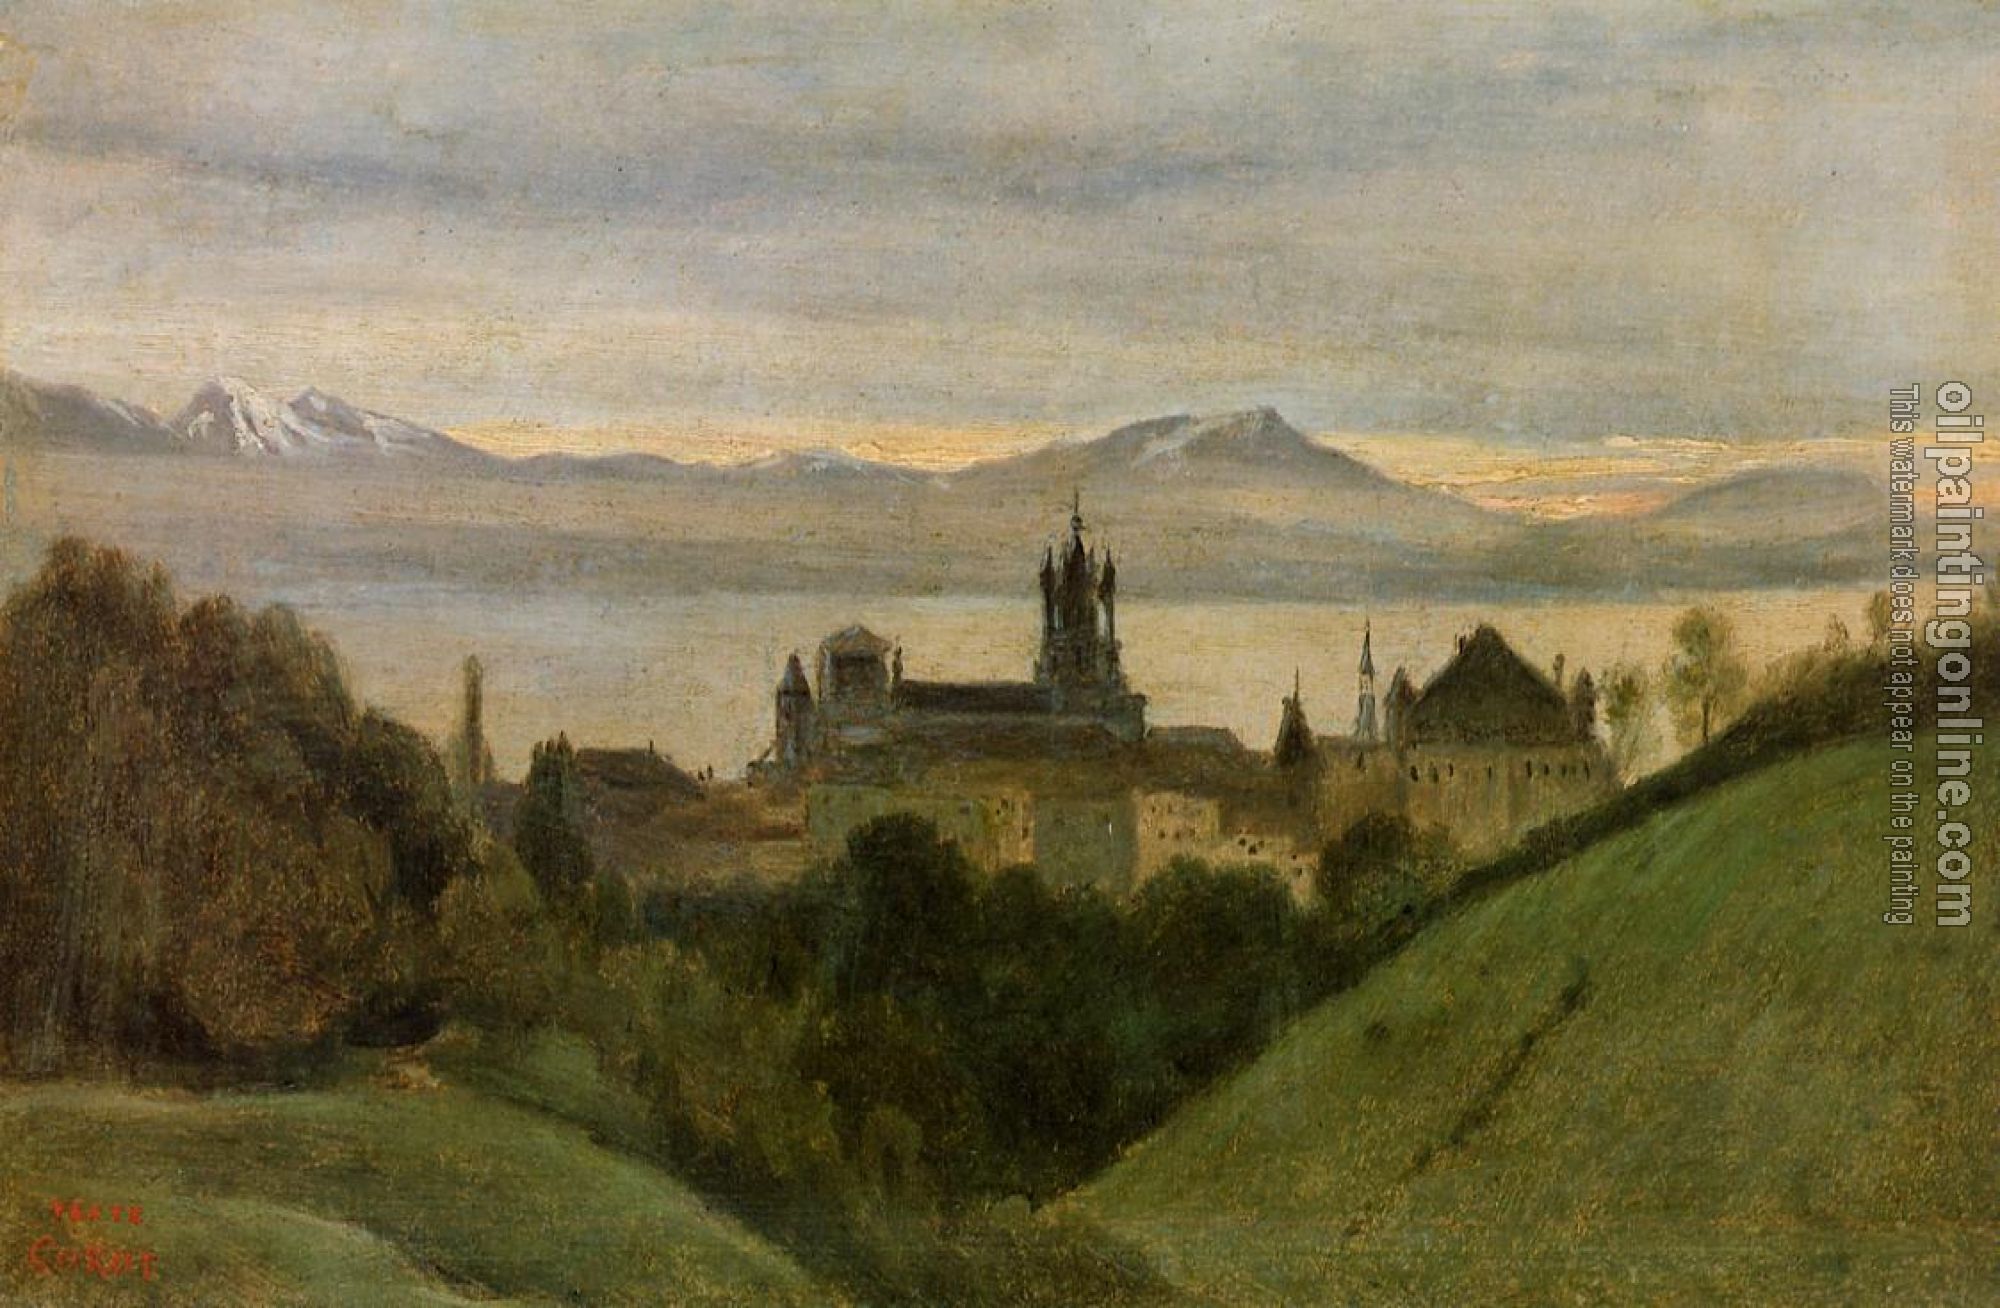 Corot, Jean-Baptiste-Camille - Between Lake Geneva and the Alps